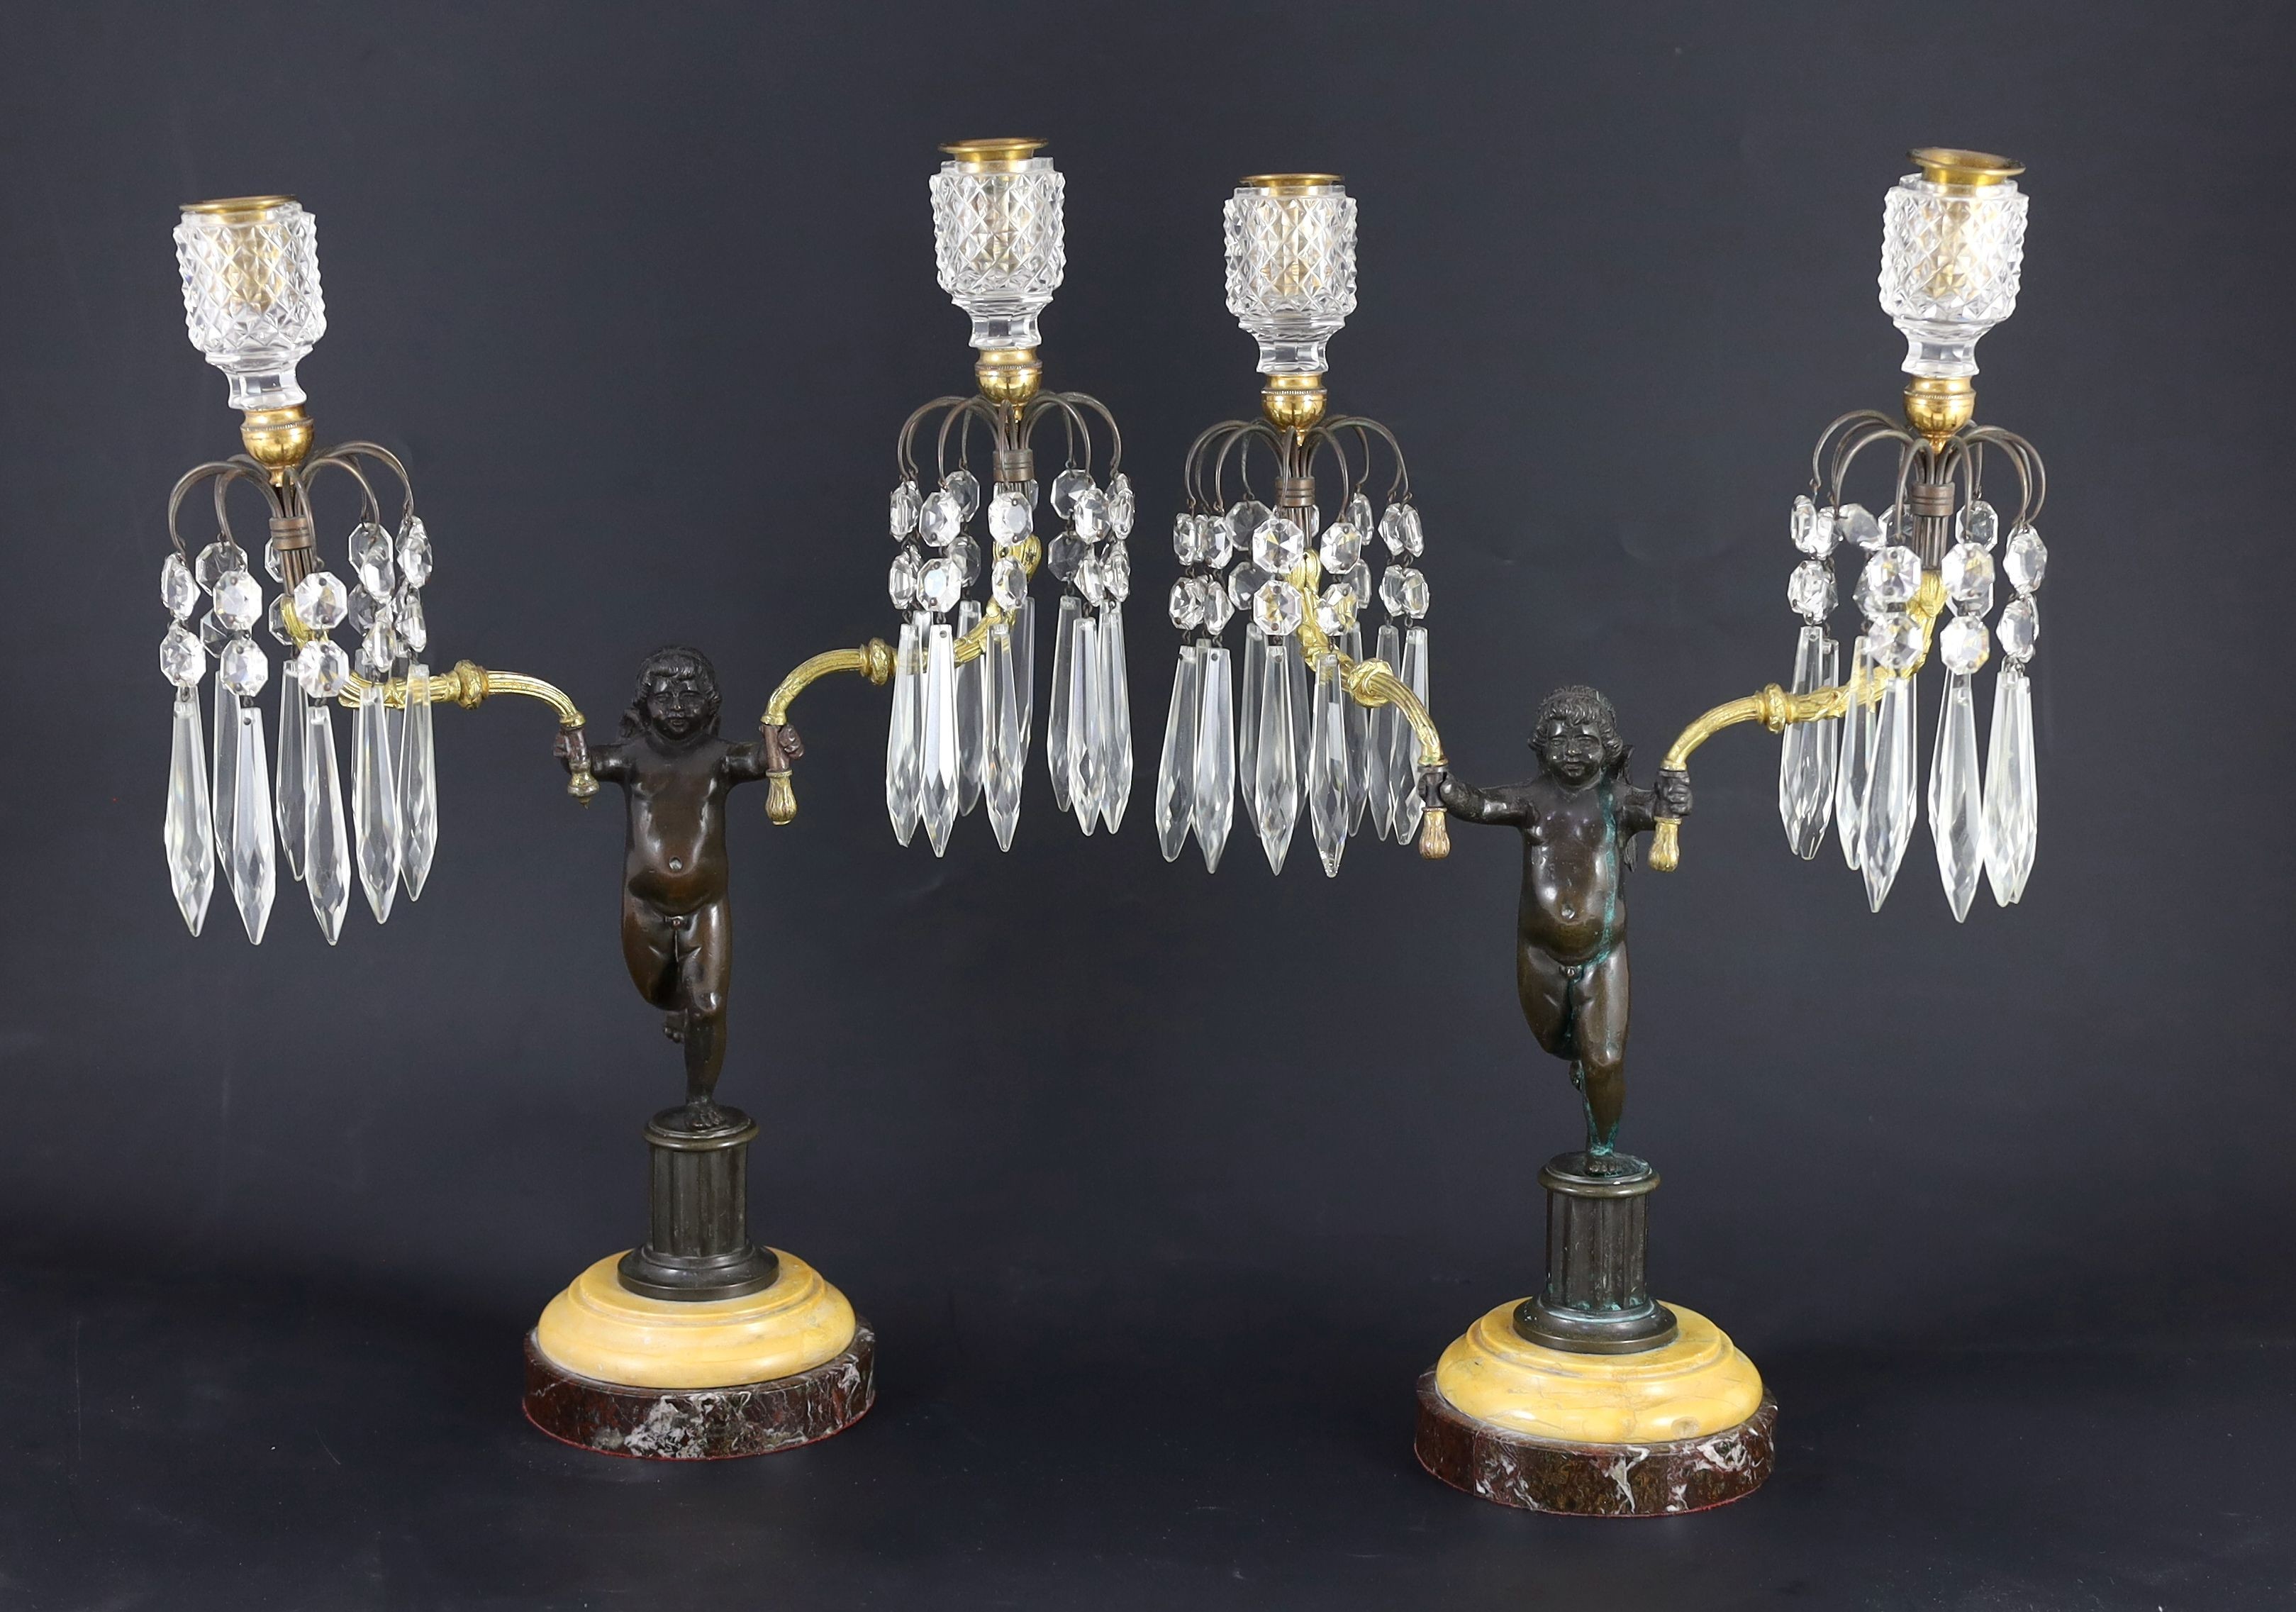 A pair of early 19th century bronze and ormolu figural candelabra, width 30cm, height 42cm